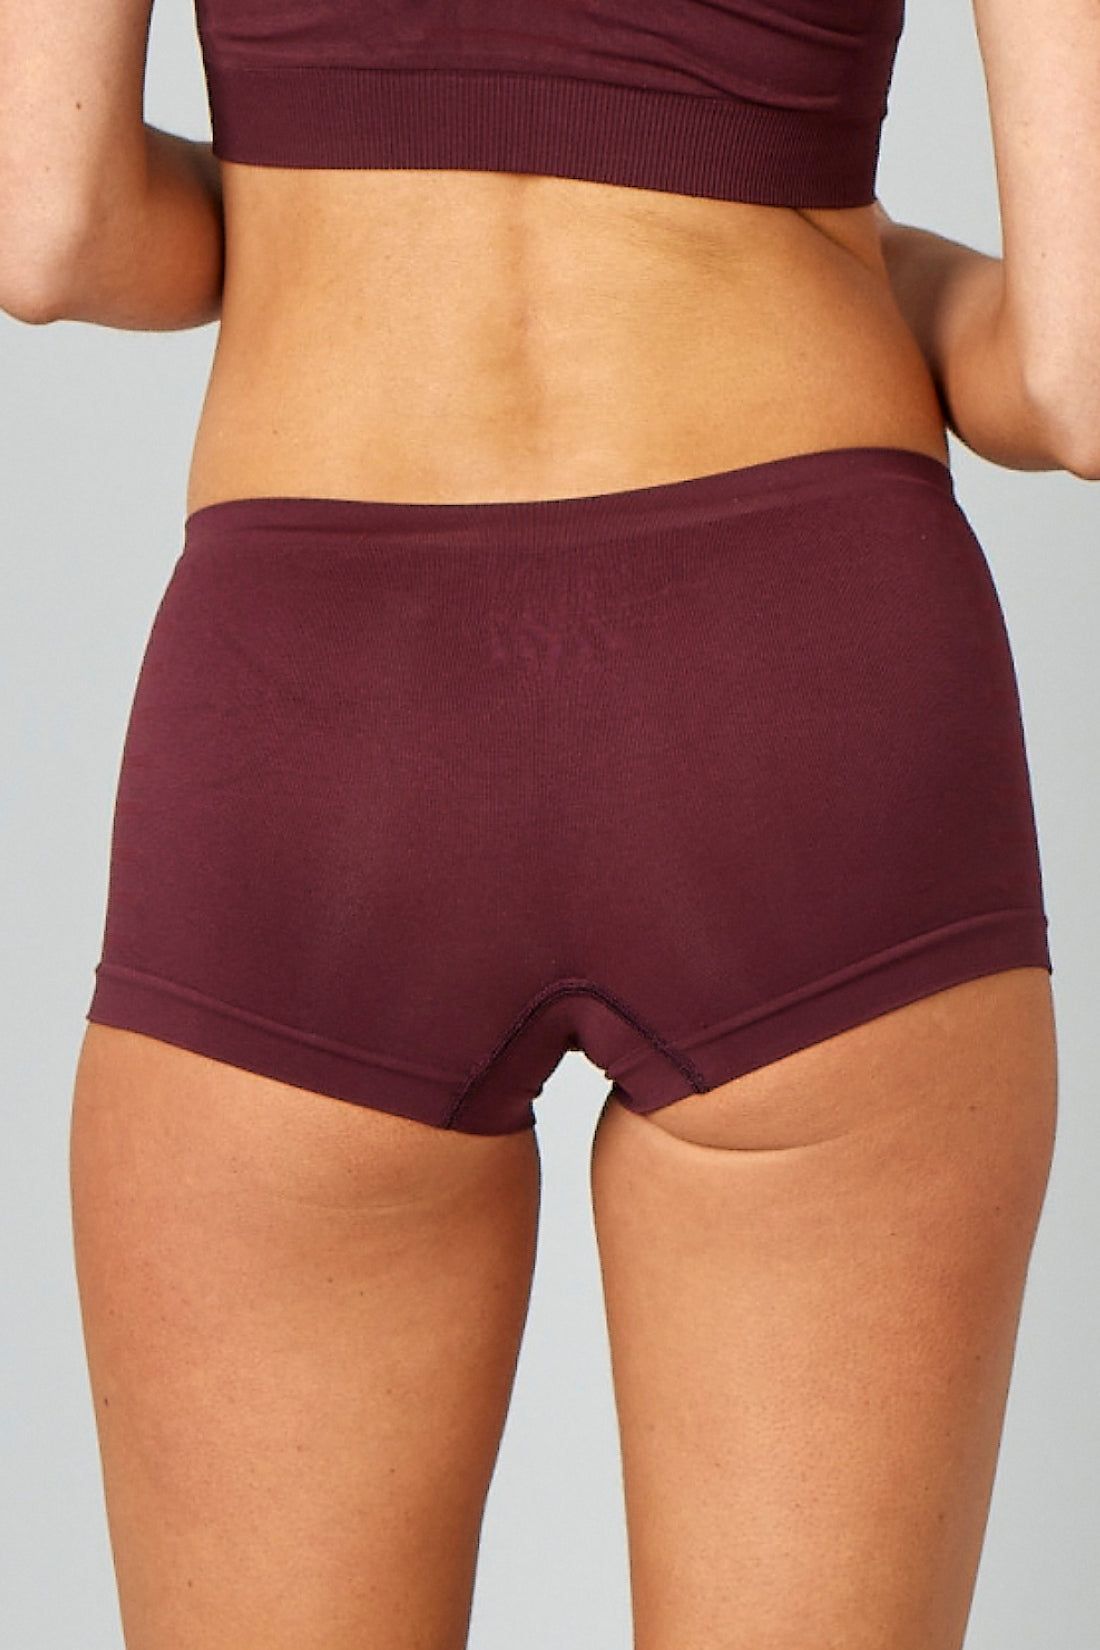 Seamless Thong - Dusty Rose